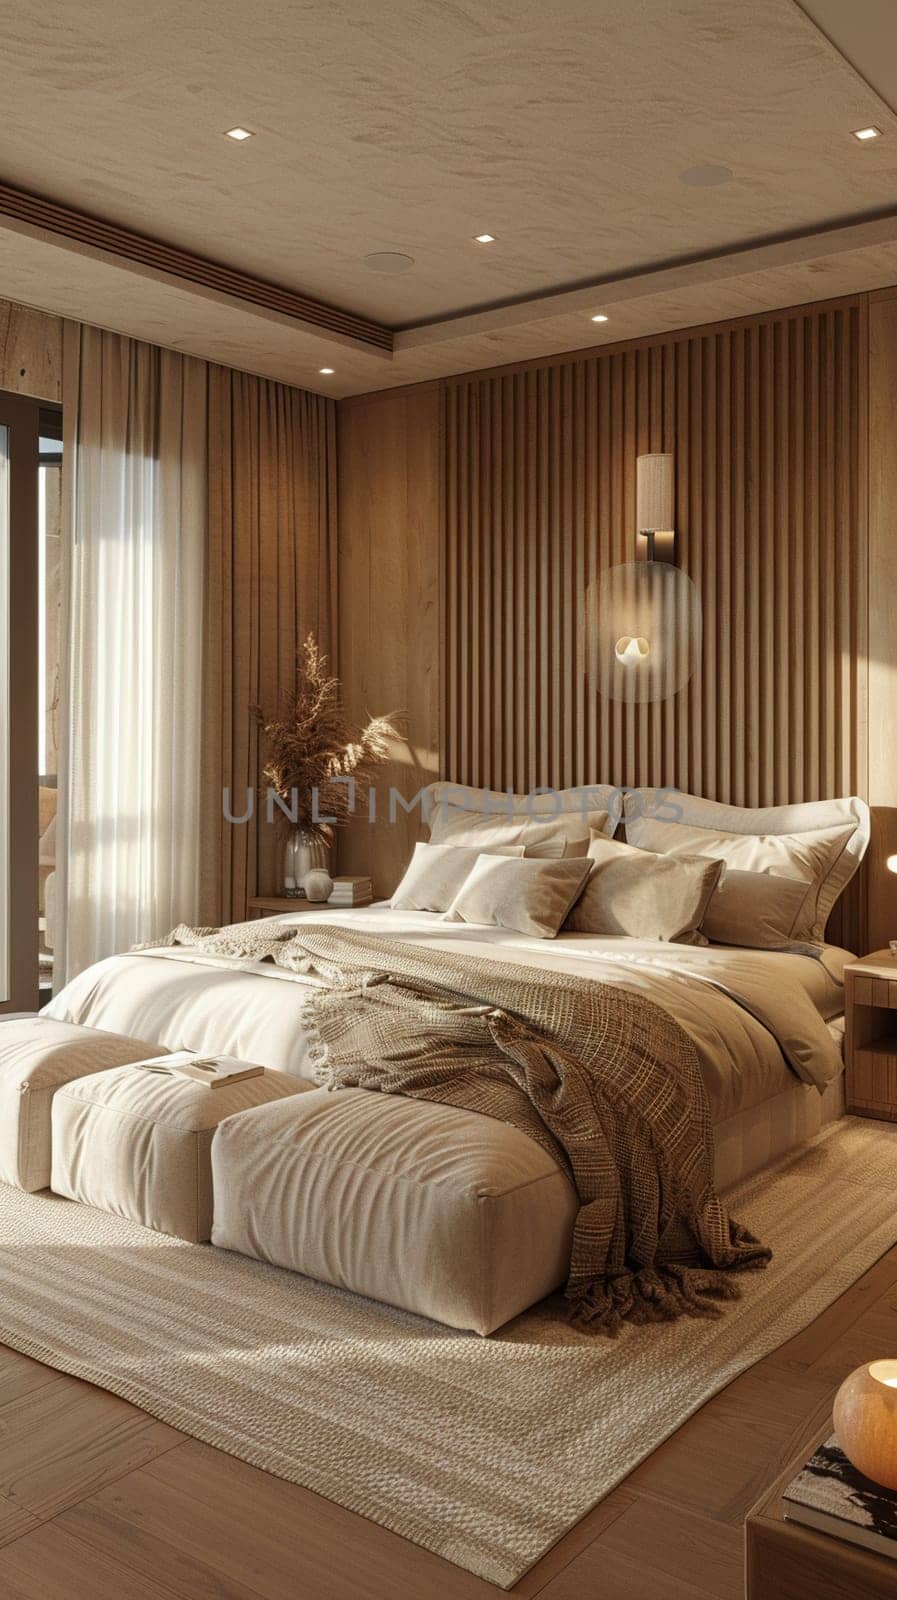 Understated luxury hotel suite with subtle textures and neutral tones.